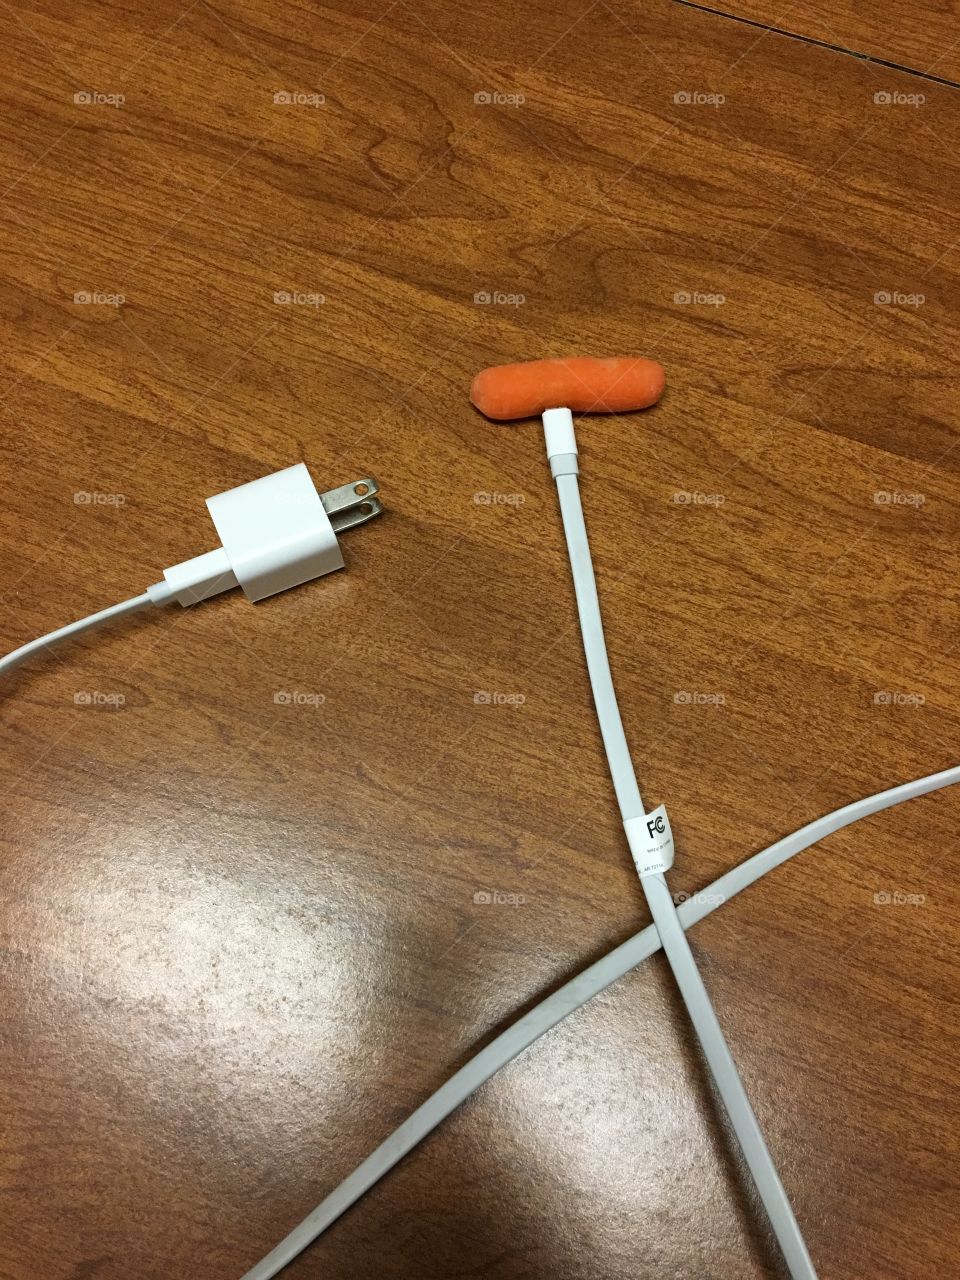 An Apple turns into a carrot